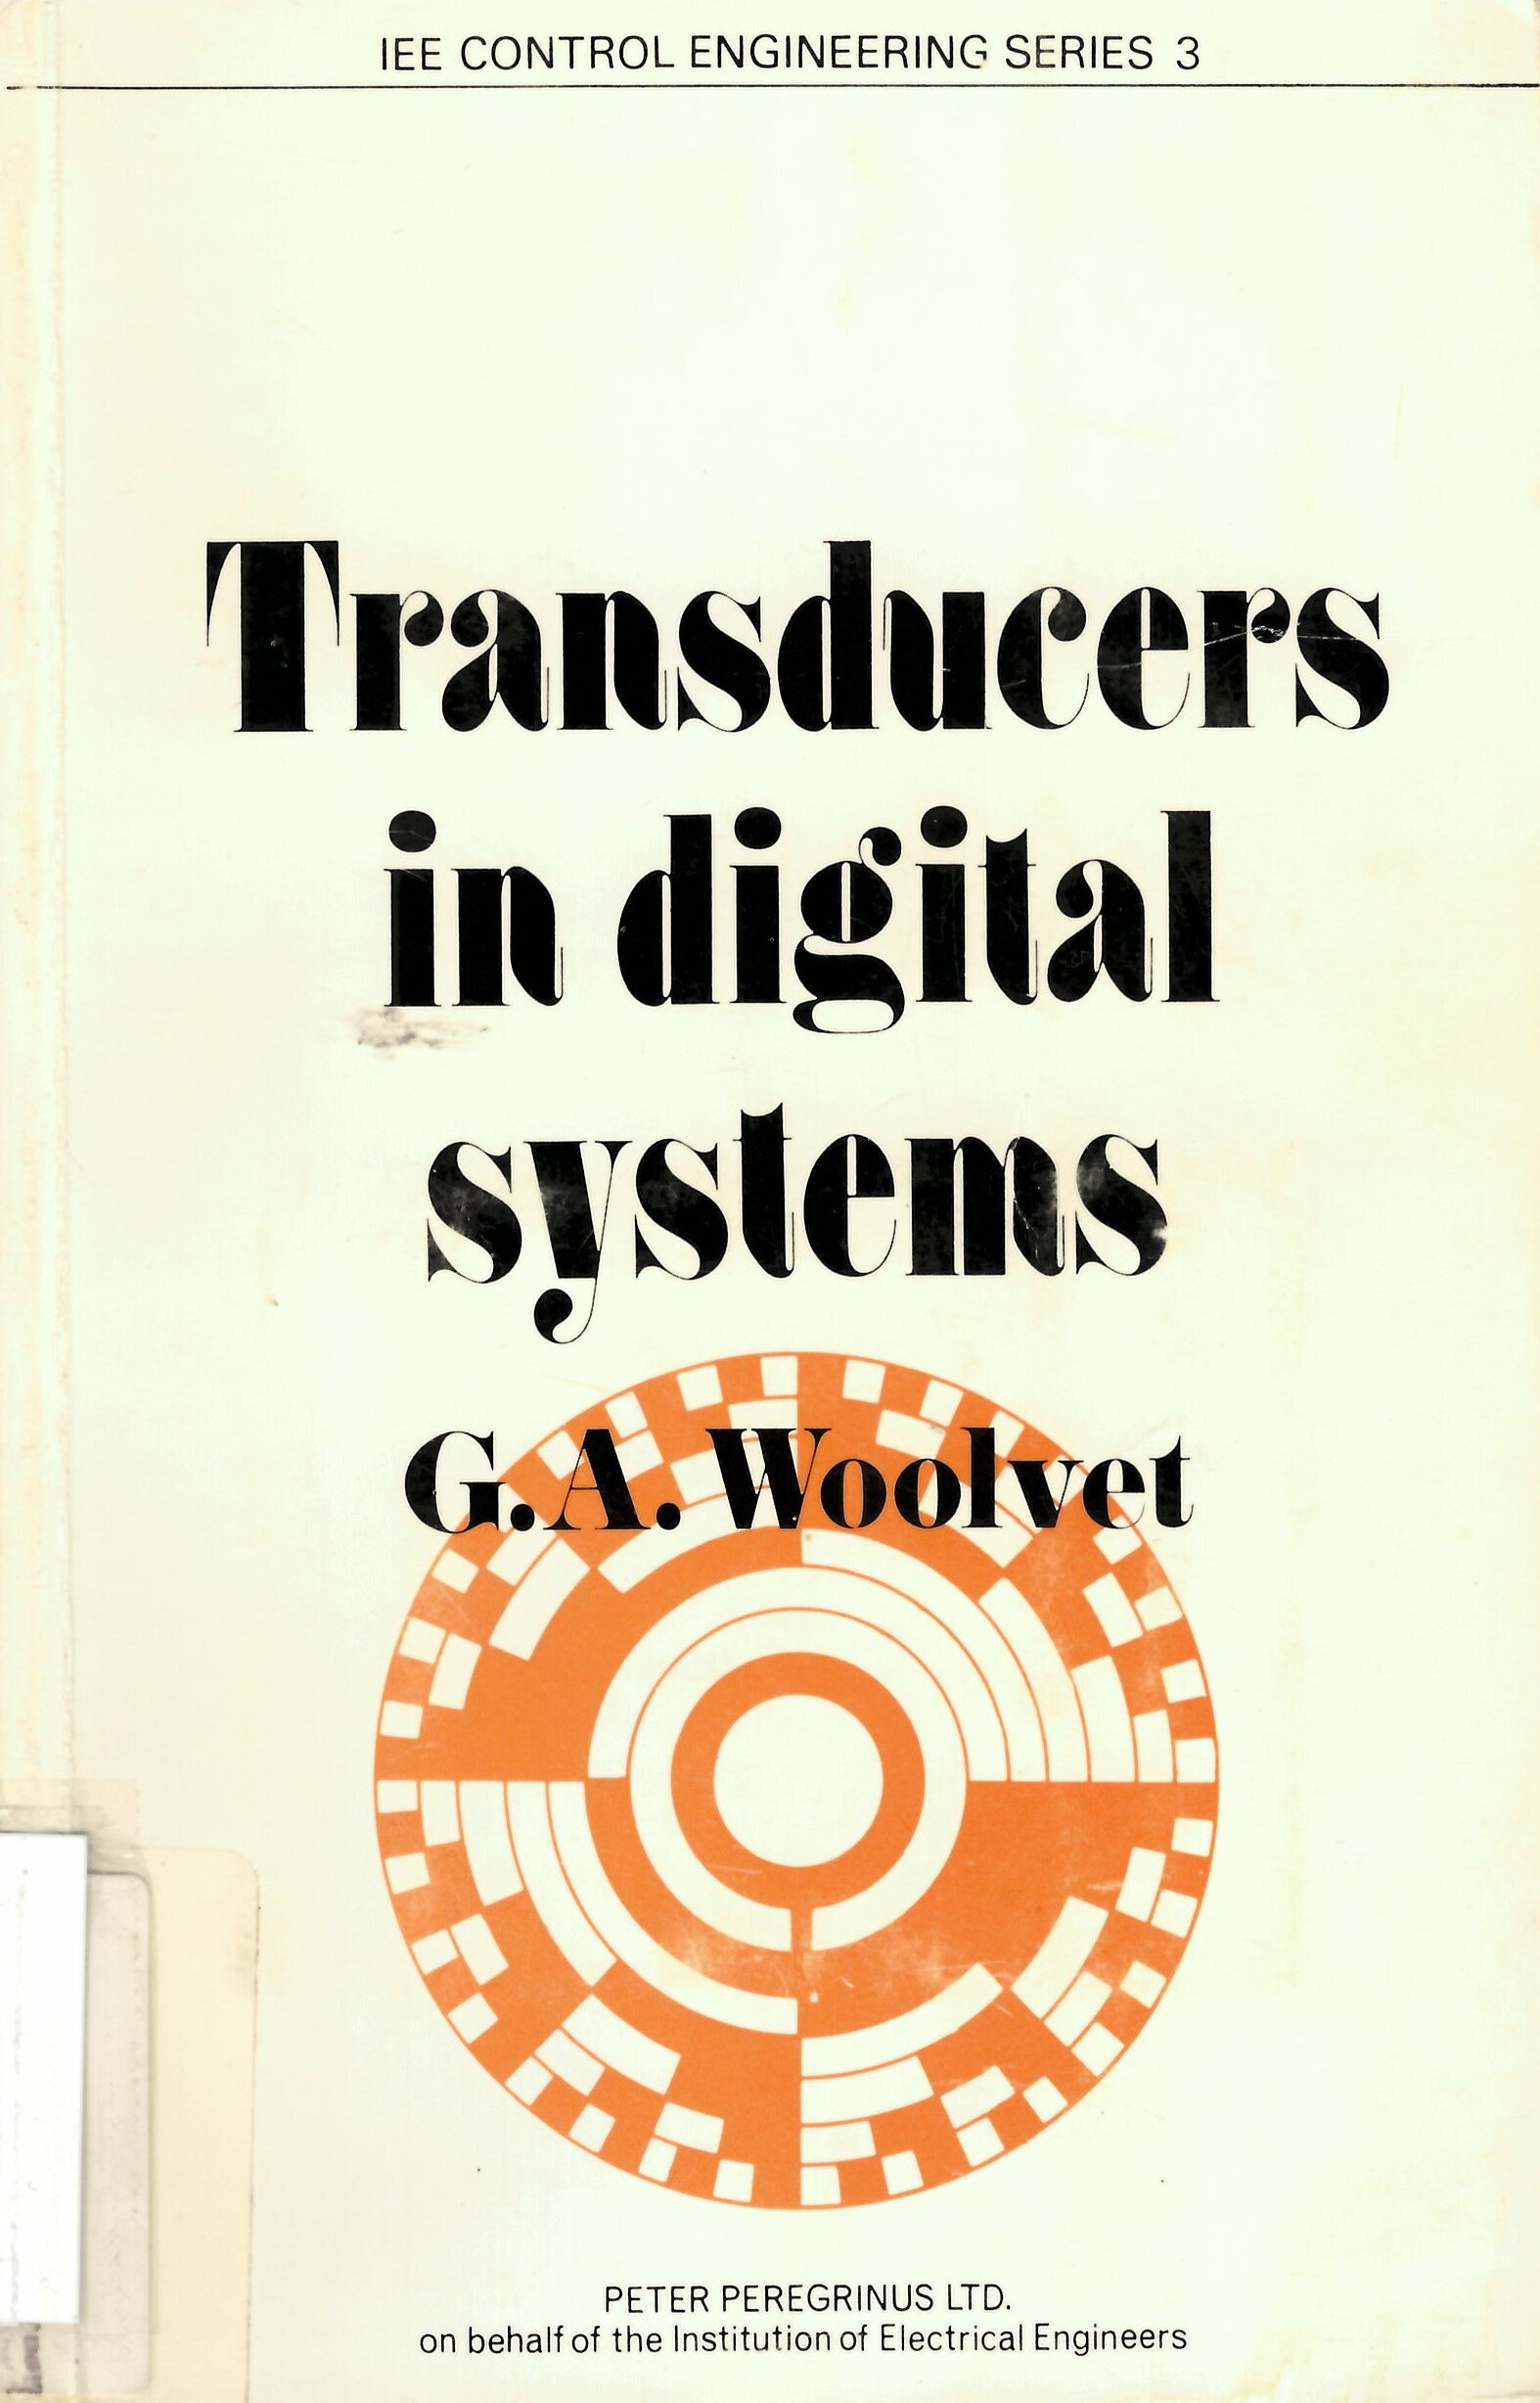 Transducers in digital systems